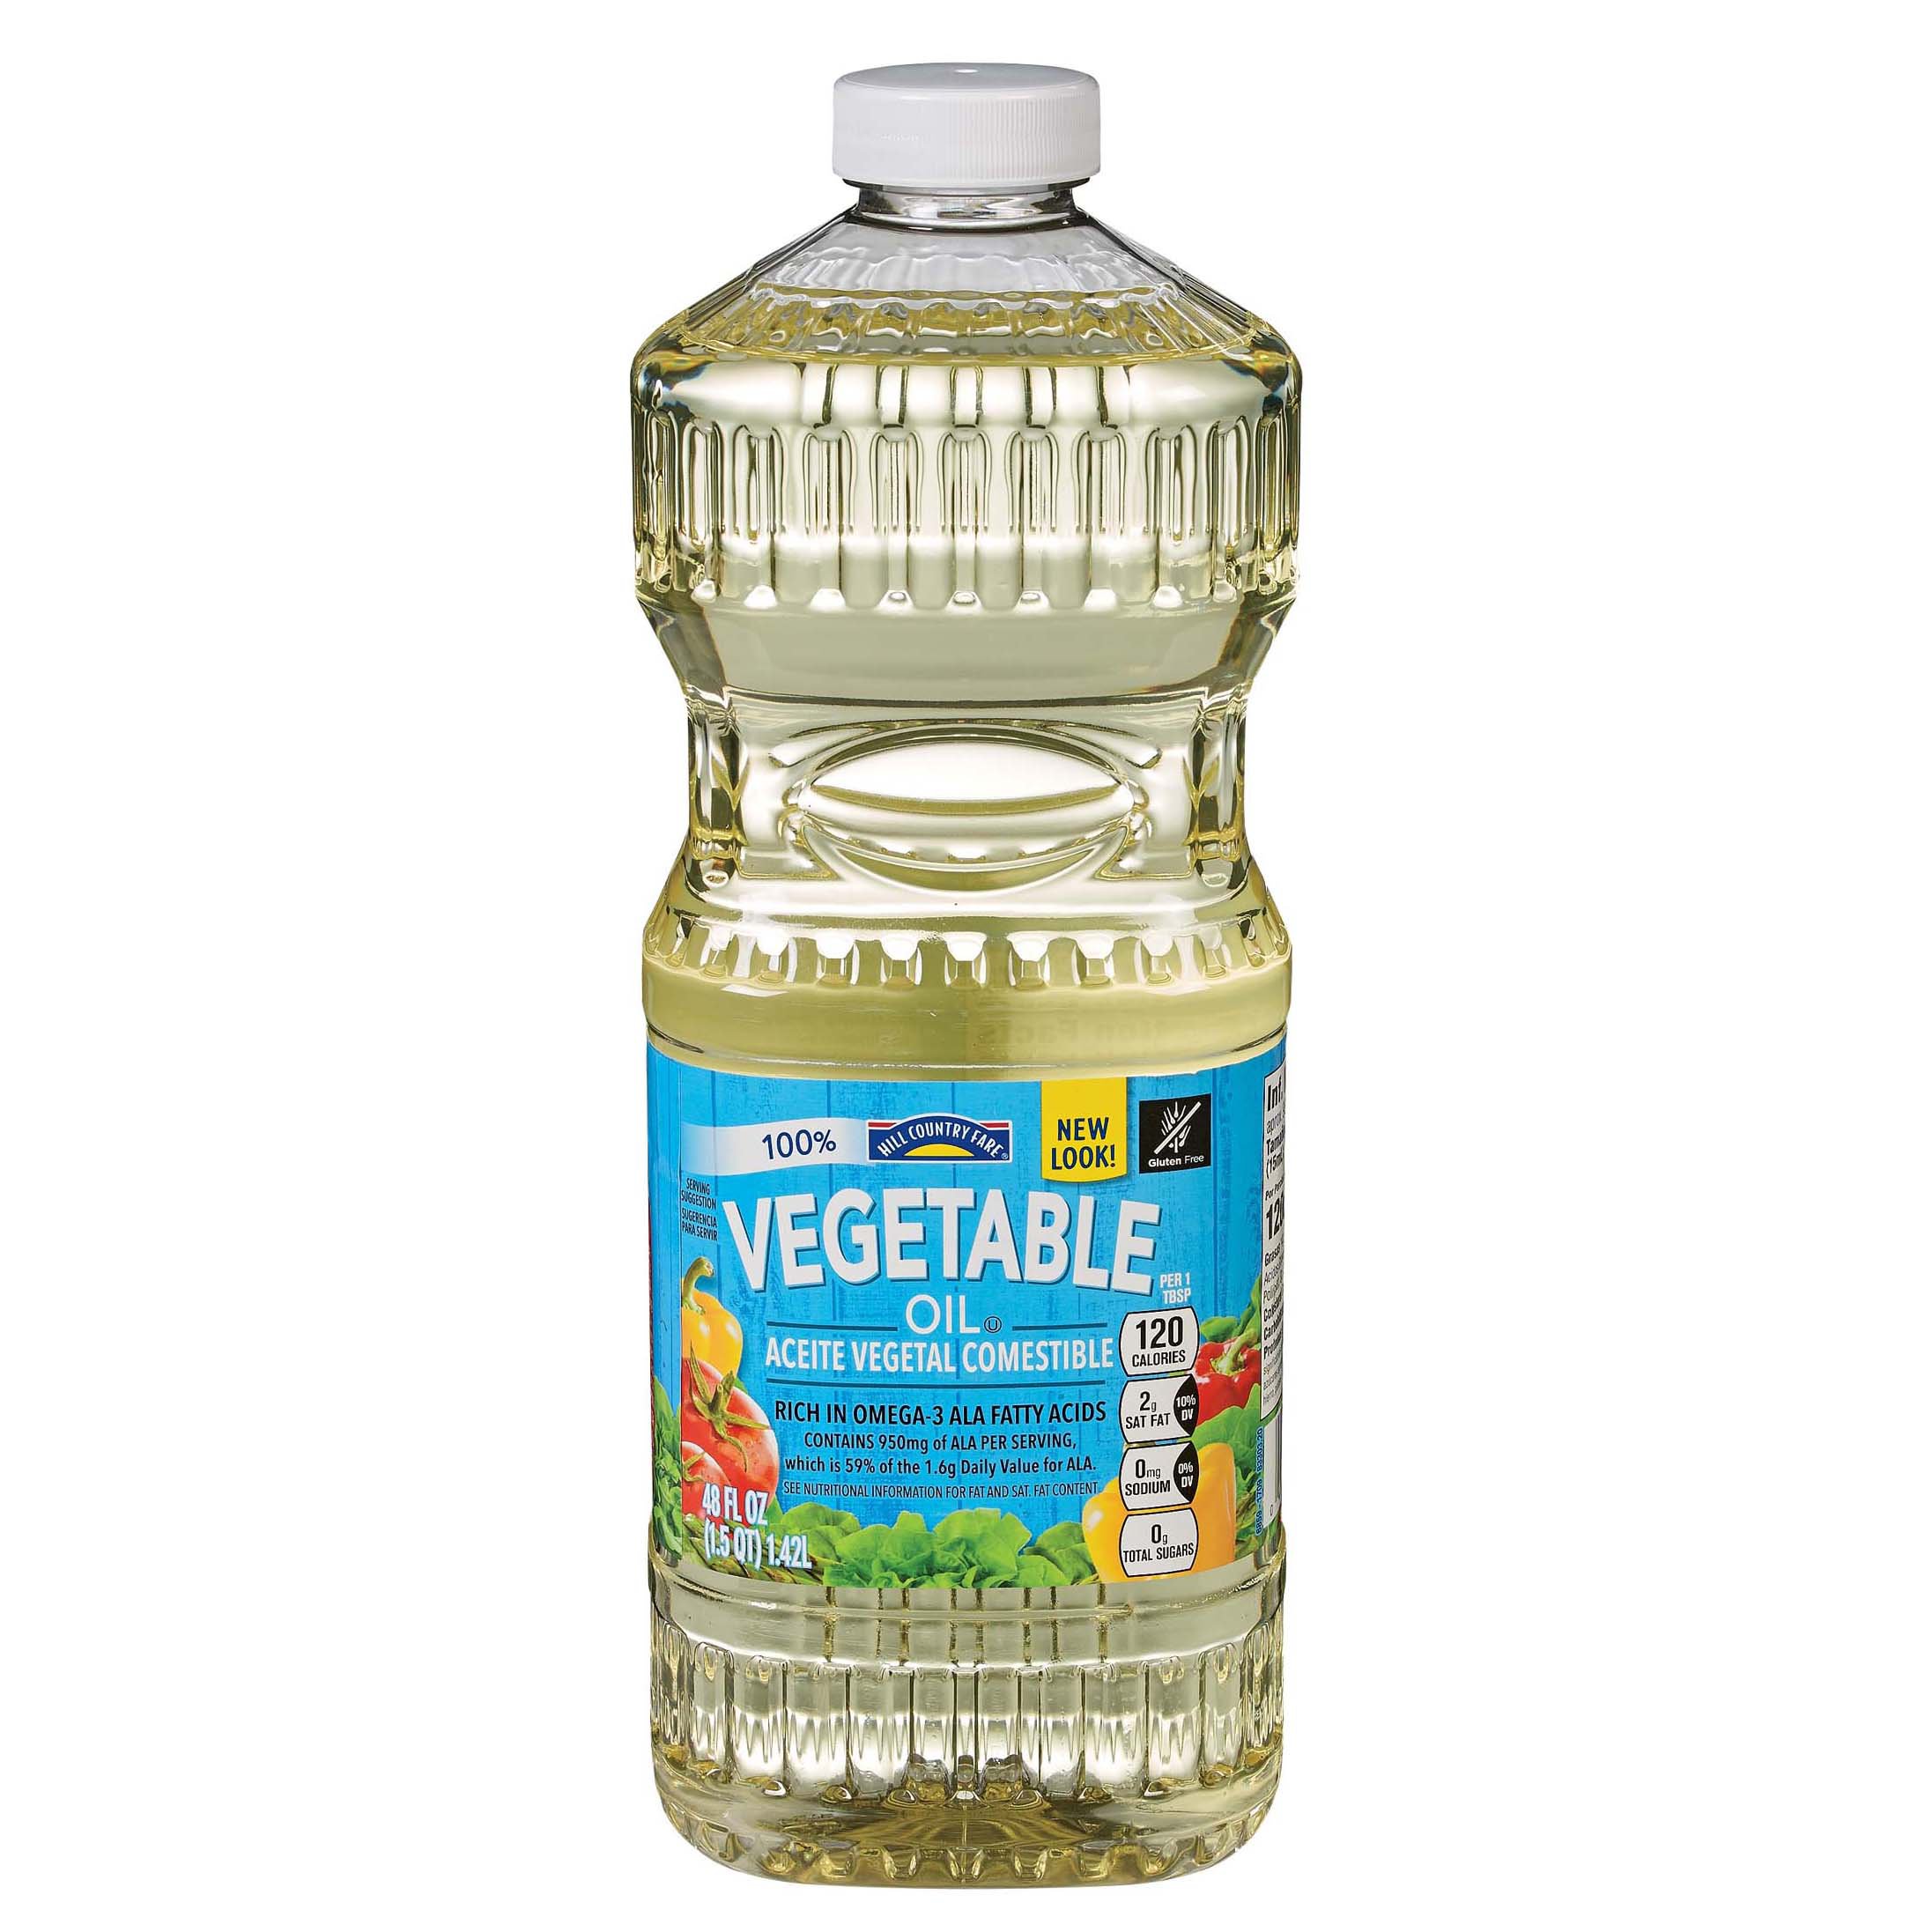 Vegetable Oils, Which Ones Are The Healthiest? - Nolita